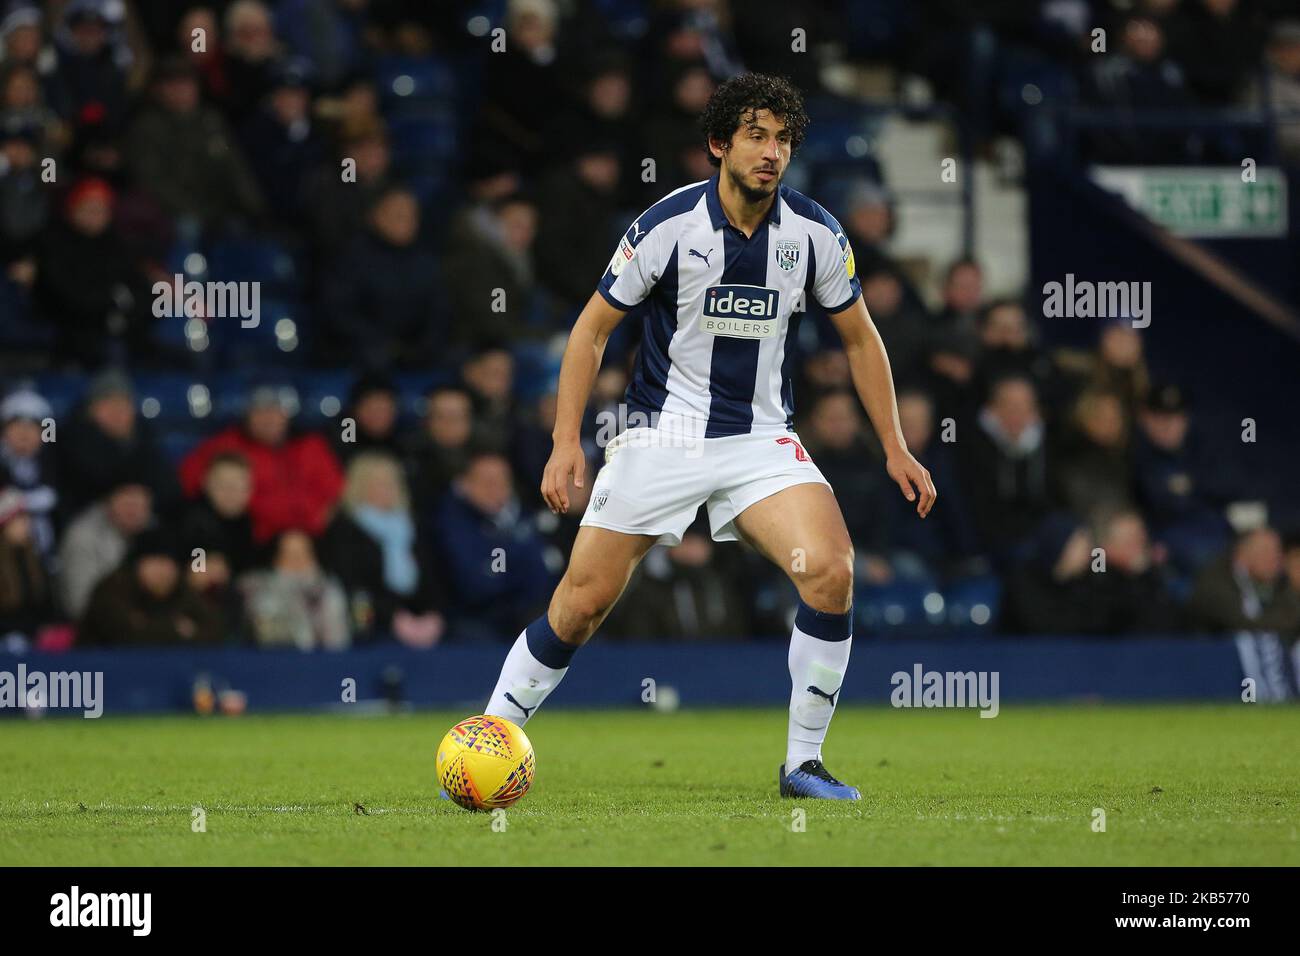 Ahmed Hegazy of West Bromwich Albion during the Sky Bet Championship match between West Bromwich Albion and Middlesbrough at The Hawthorns in West Bromwich, UK on Saturday, February 2, 2019. (Photo by MI News/NurPhoto) Stock Photo